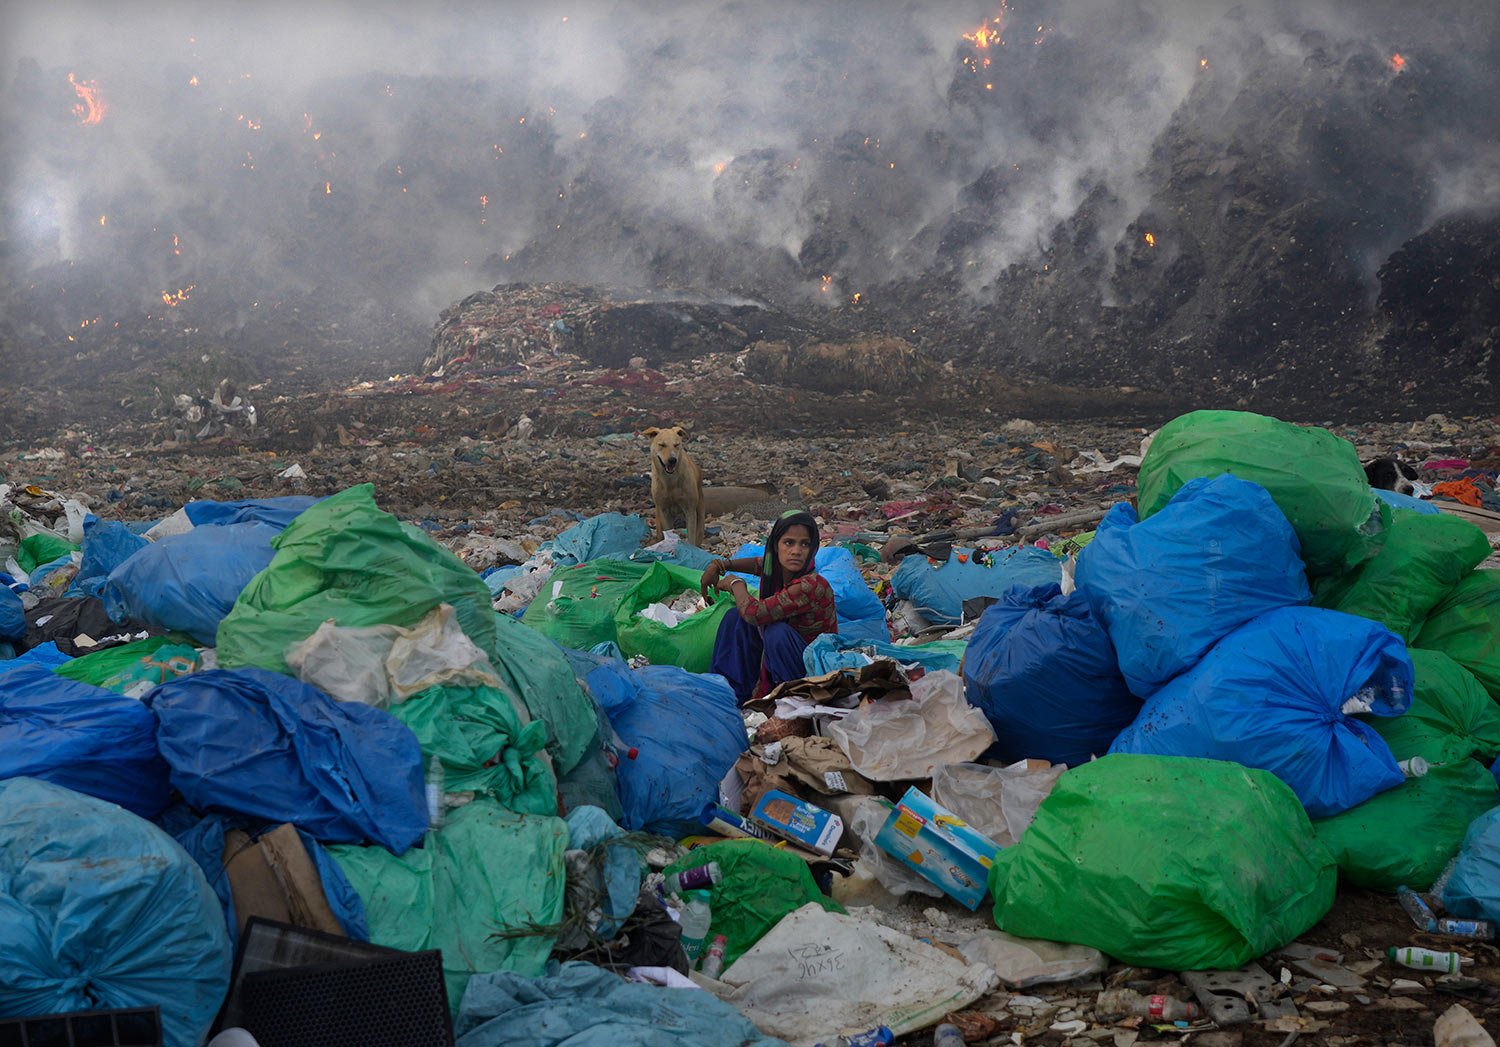  A ragpicker woman segregates items sitting at the edge during a fire at the Bhalswa landfill in New Delhi, India, Wednesday, April 27, 2022. (AP Photo/Manish Swarup) 